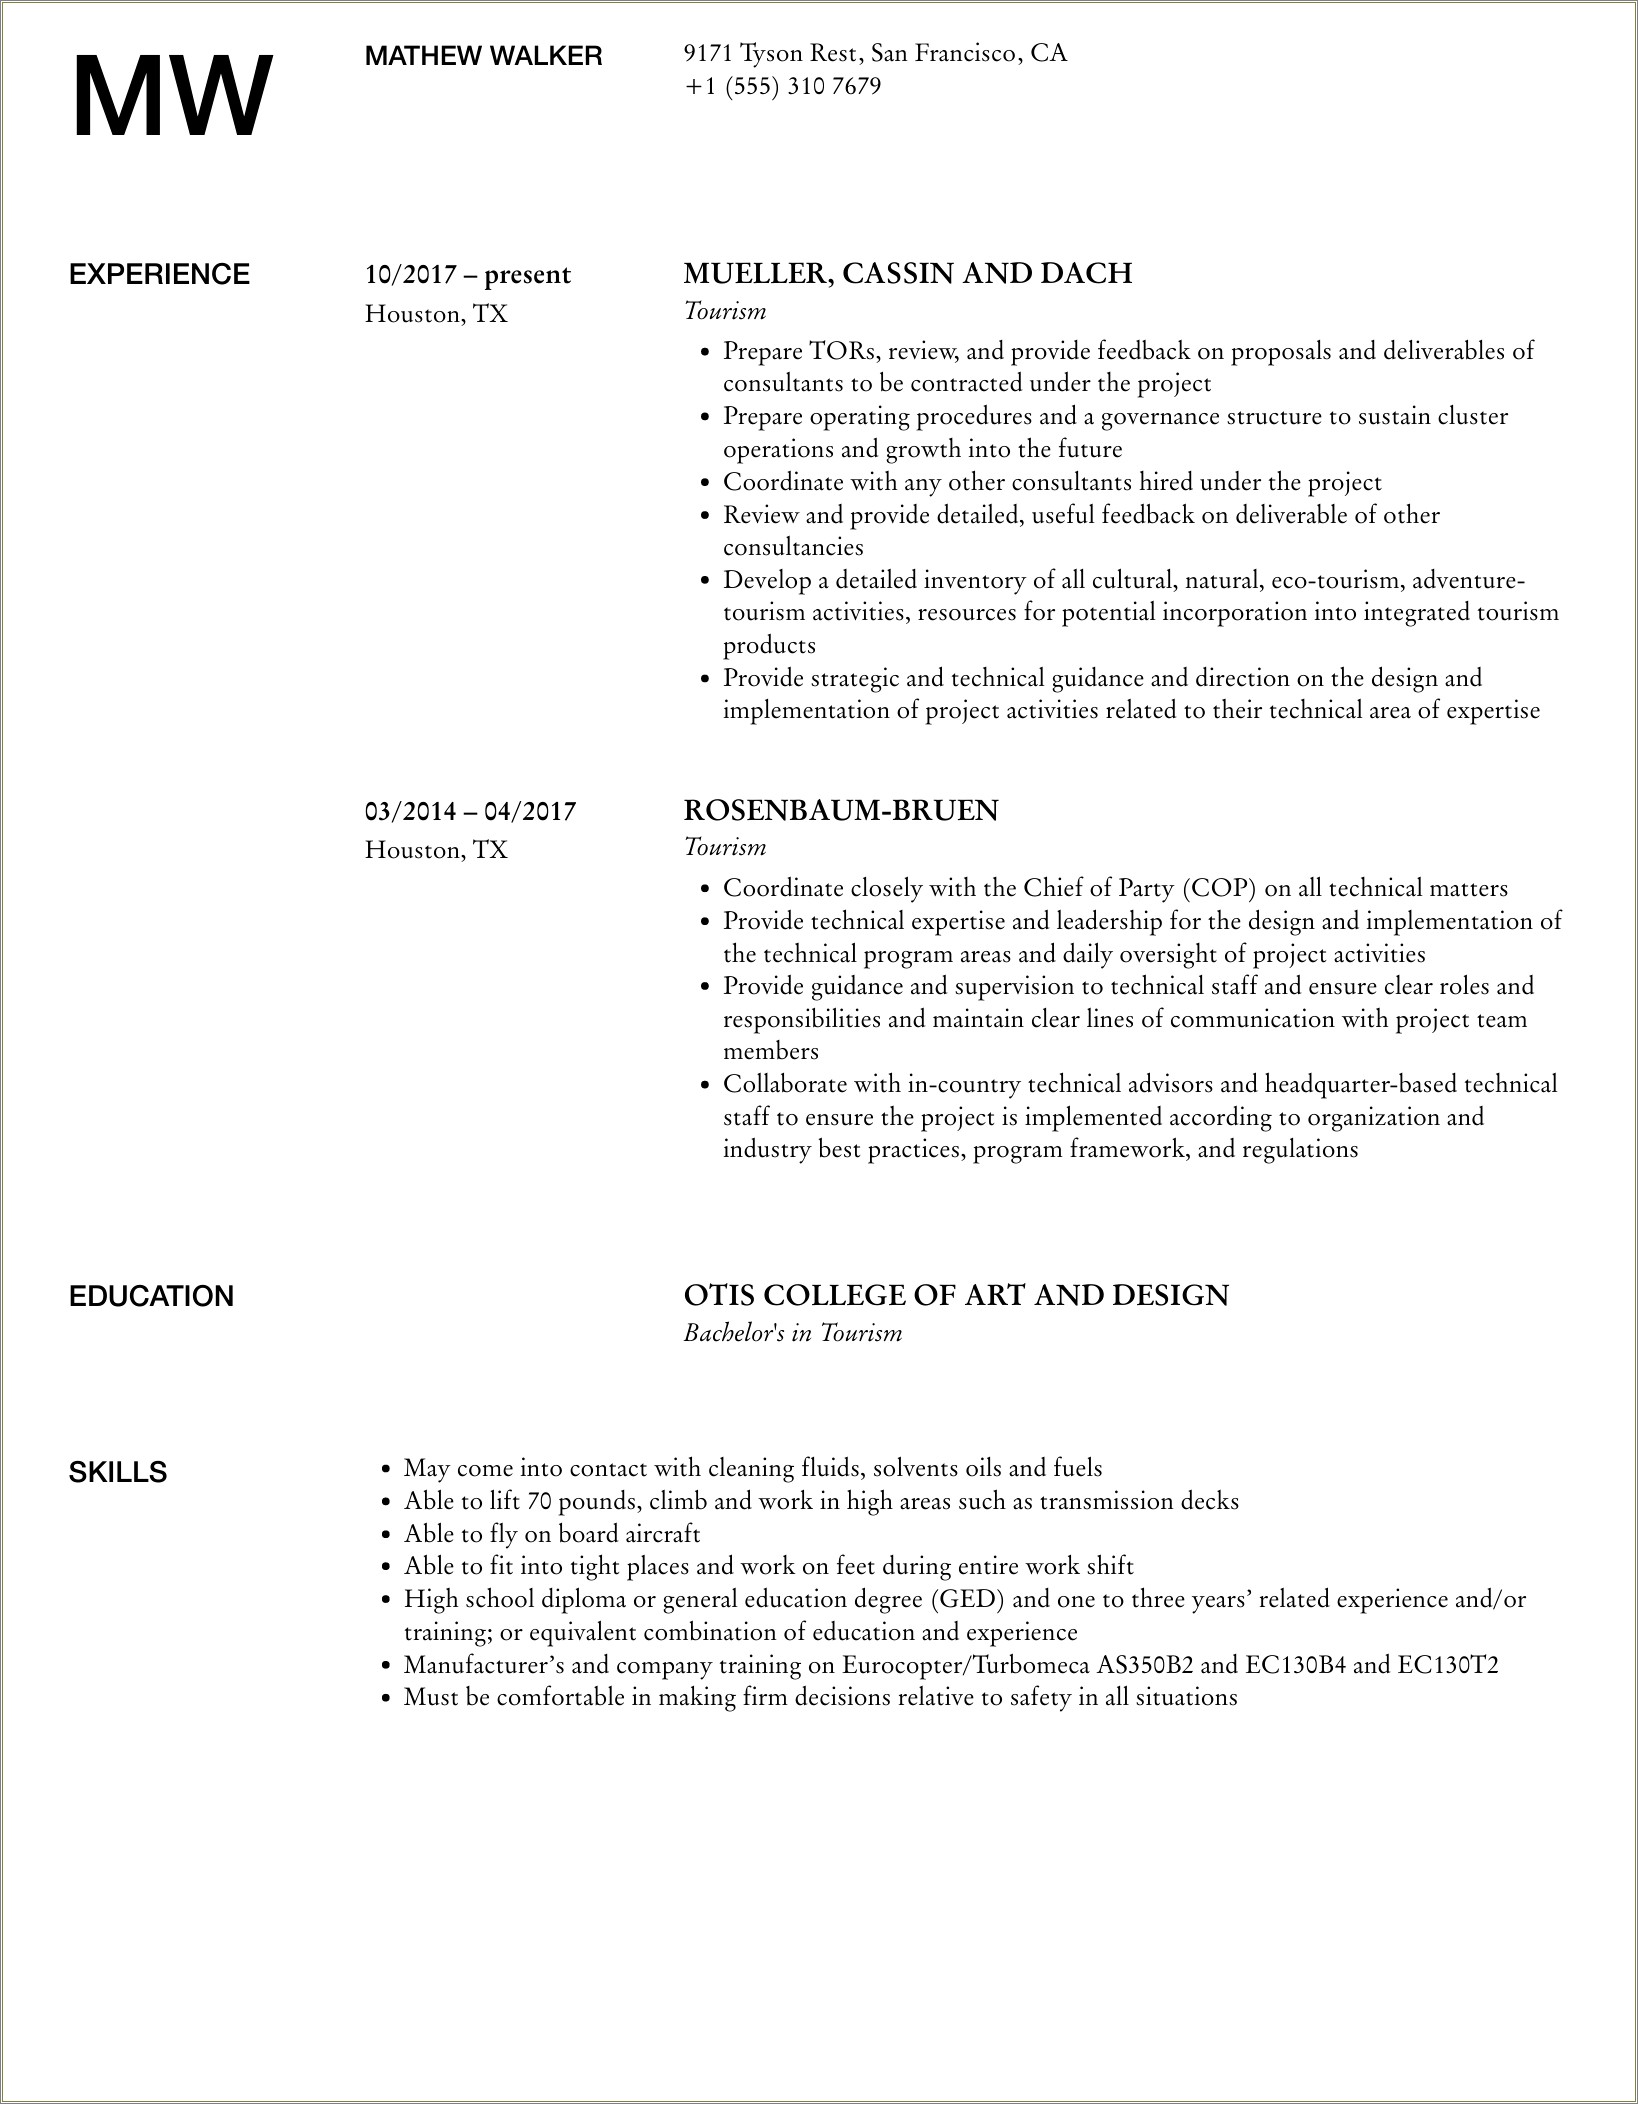 General Resume Objective Examples For Hospitality Industry